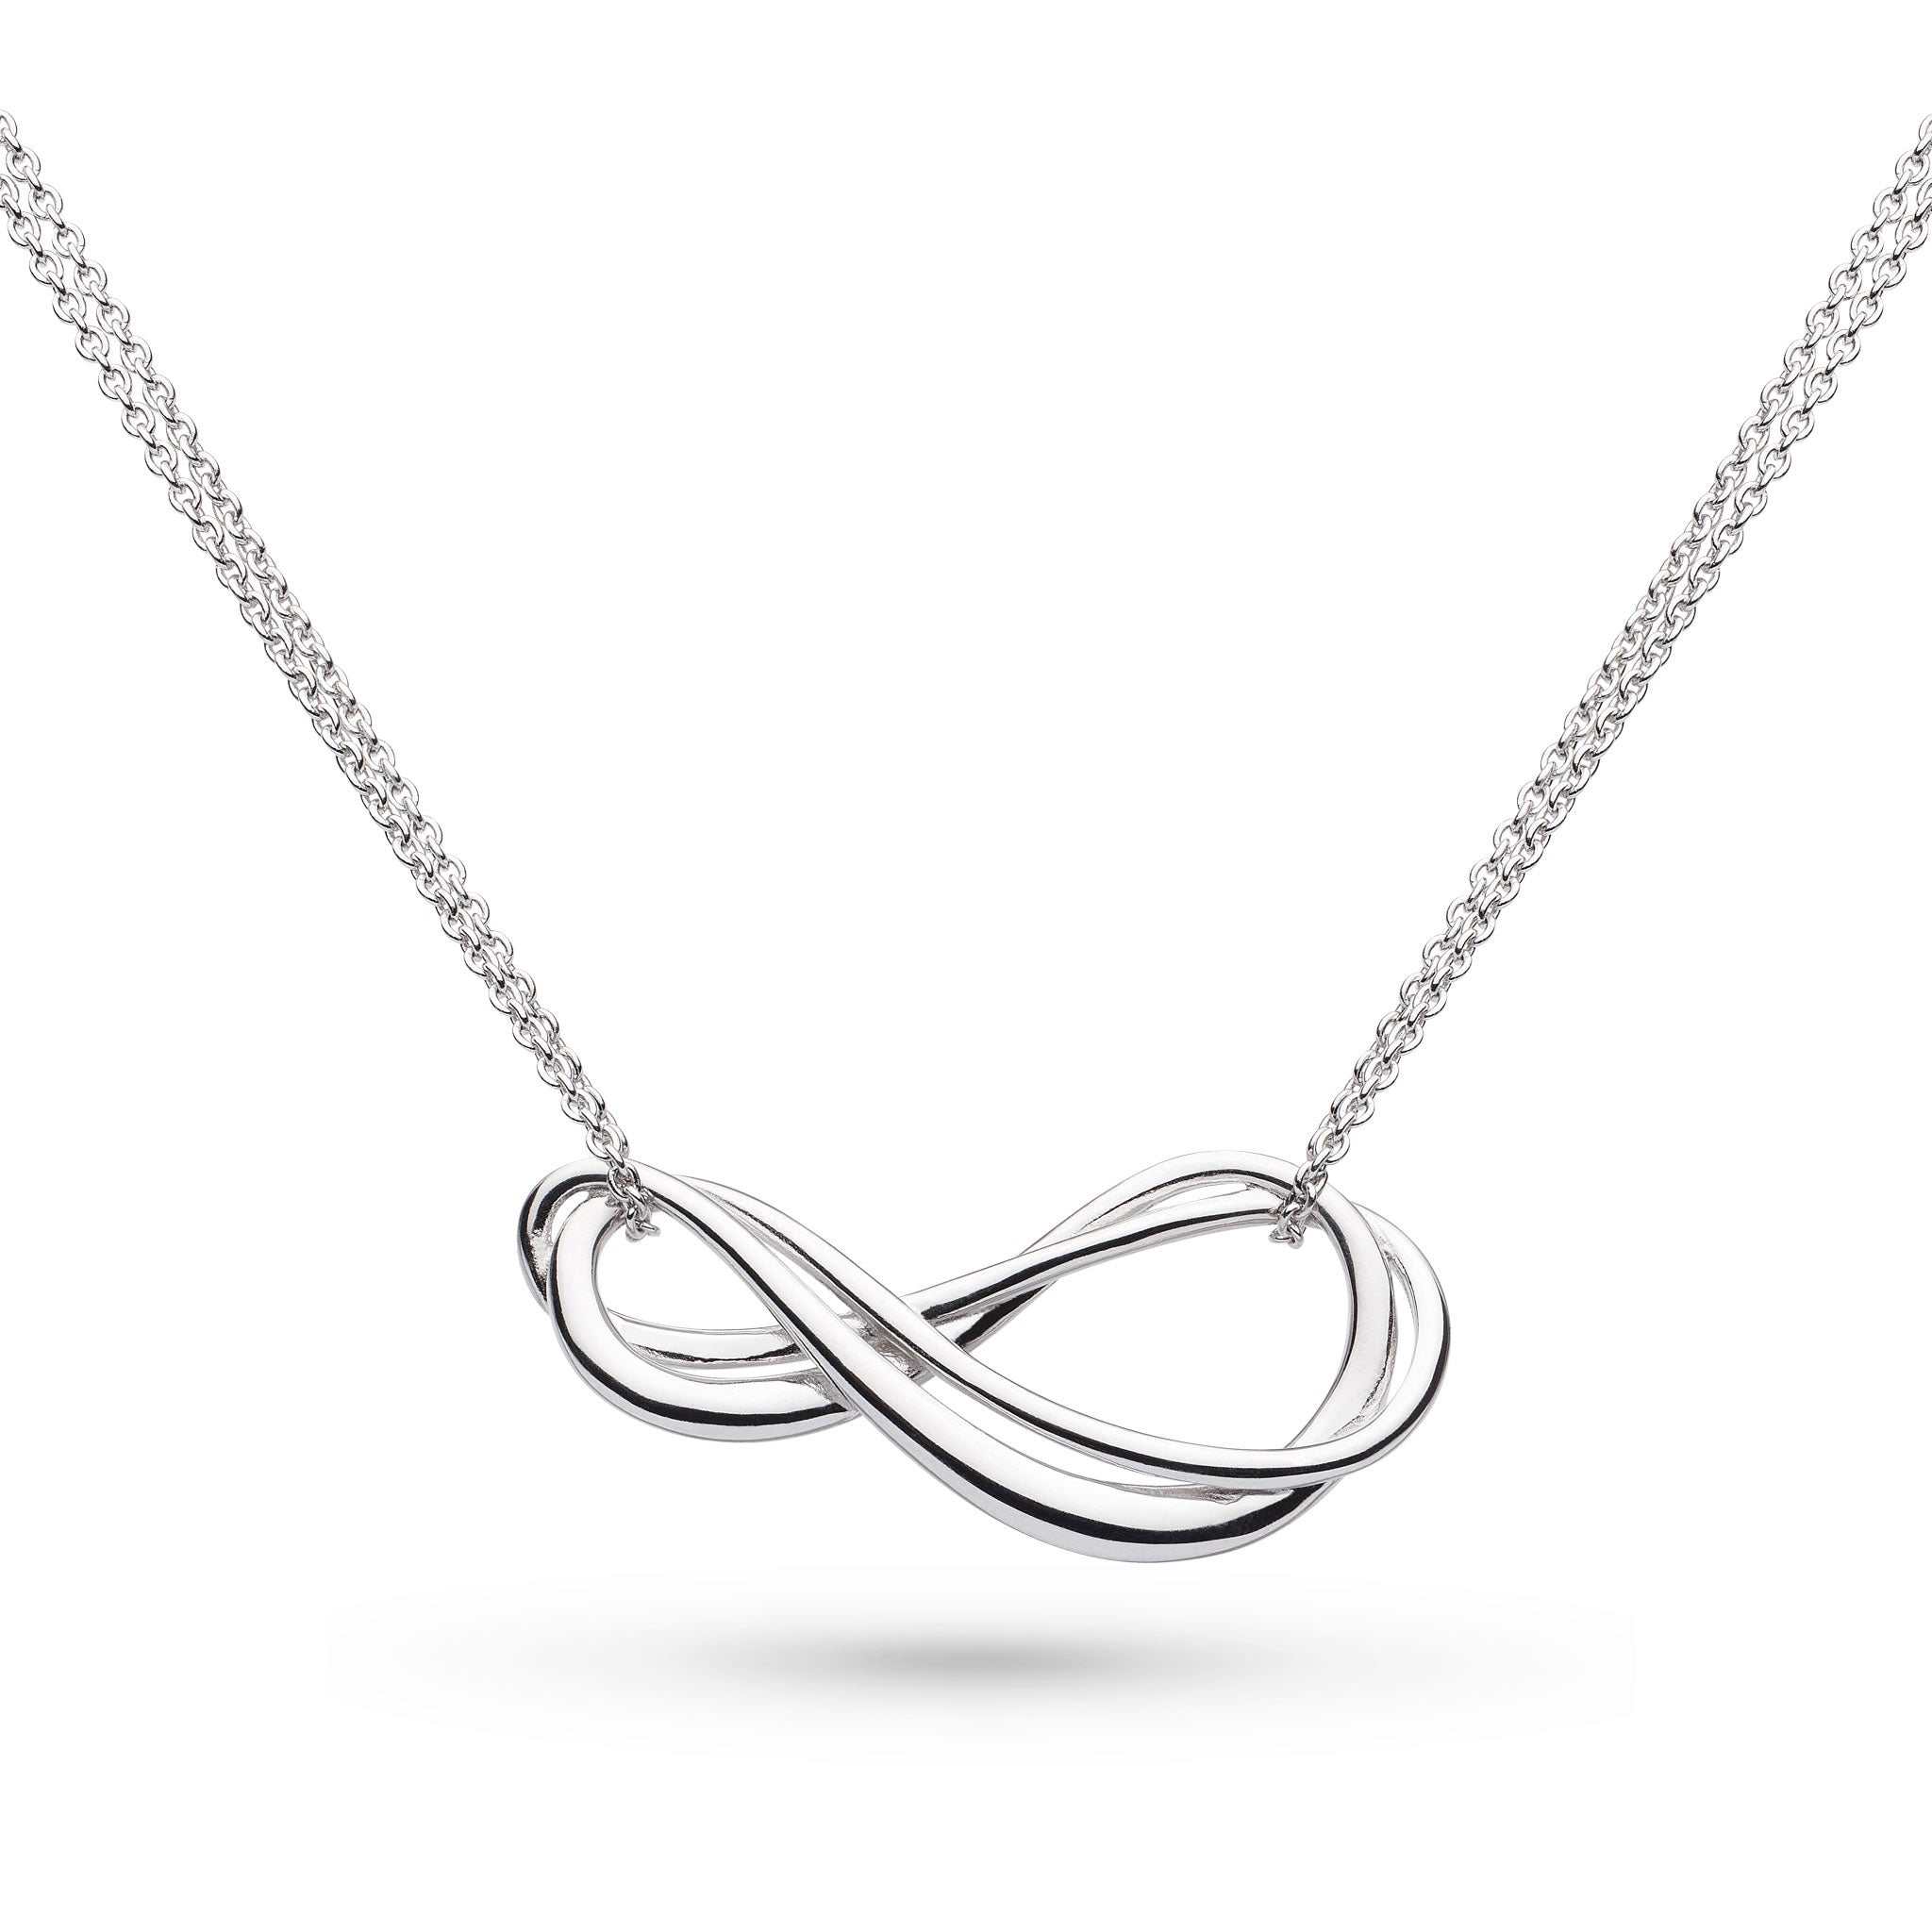 Kit Heath Infinity Double Chain 18in Necklace